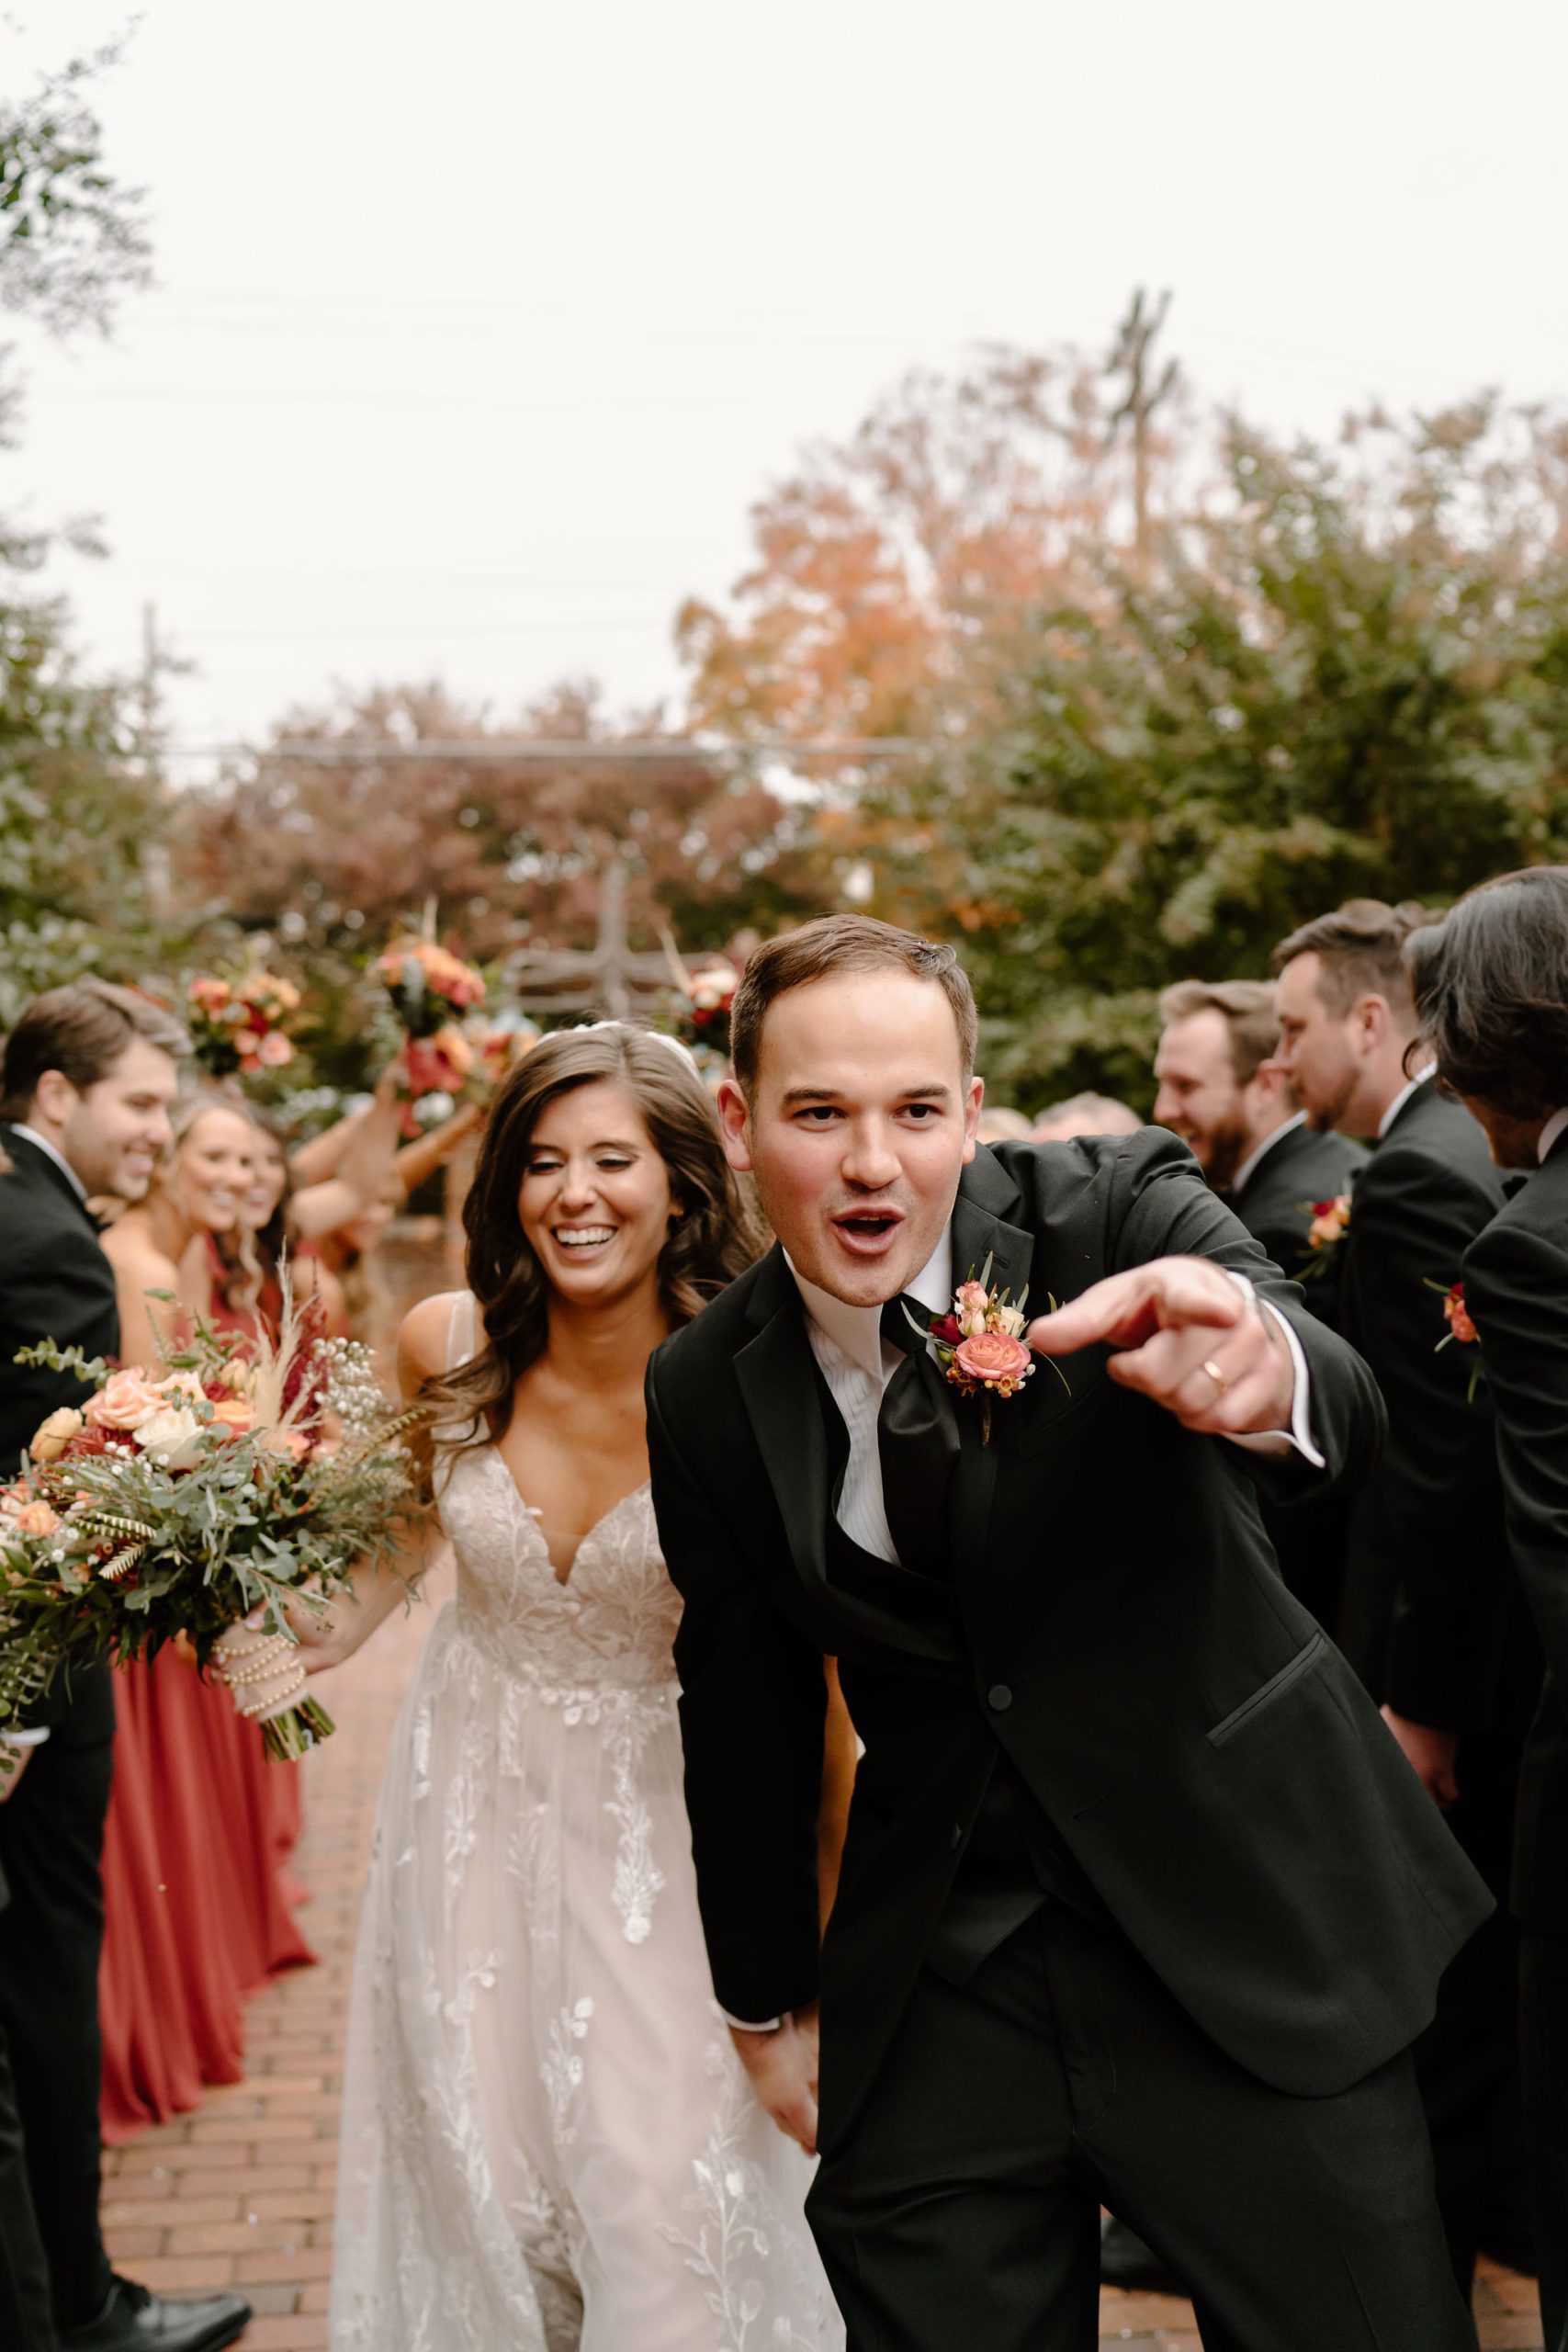 Wedding in North Carolina with bohemian colors and florals
